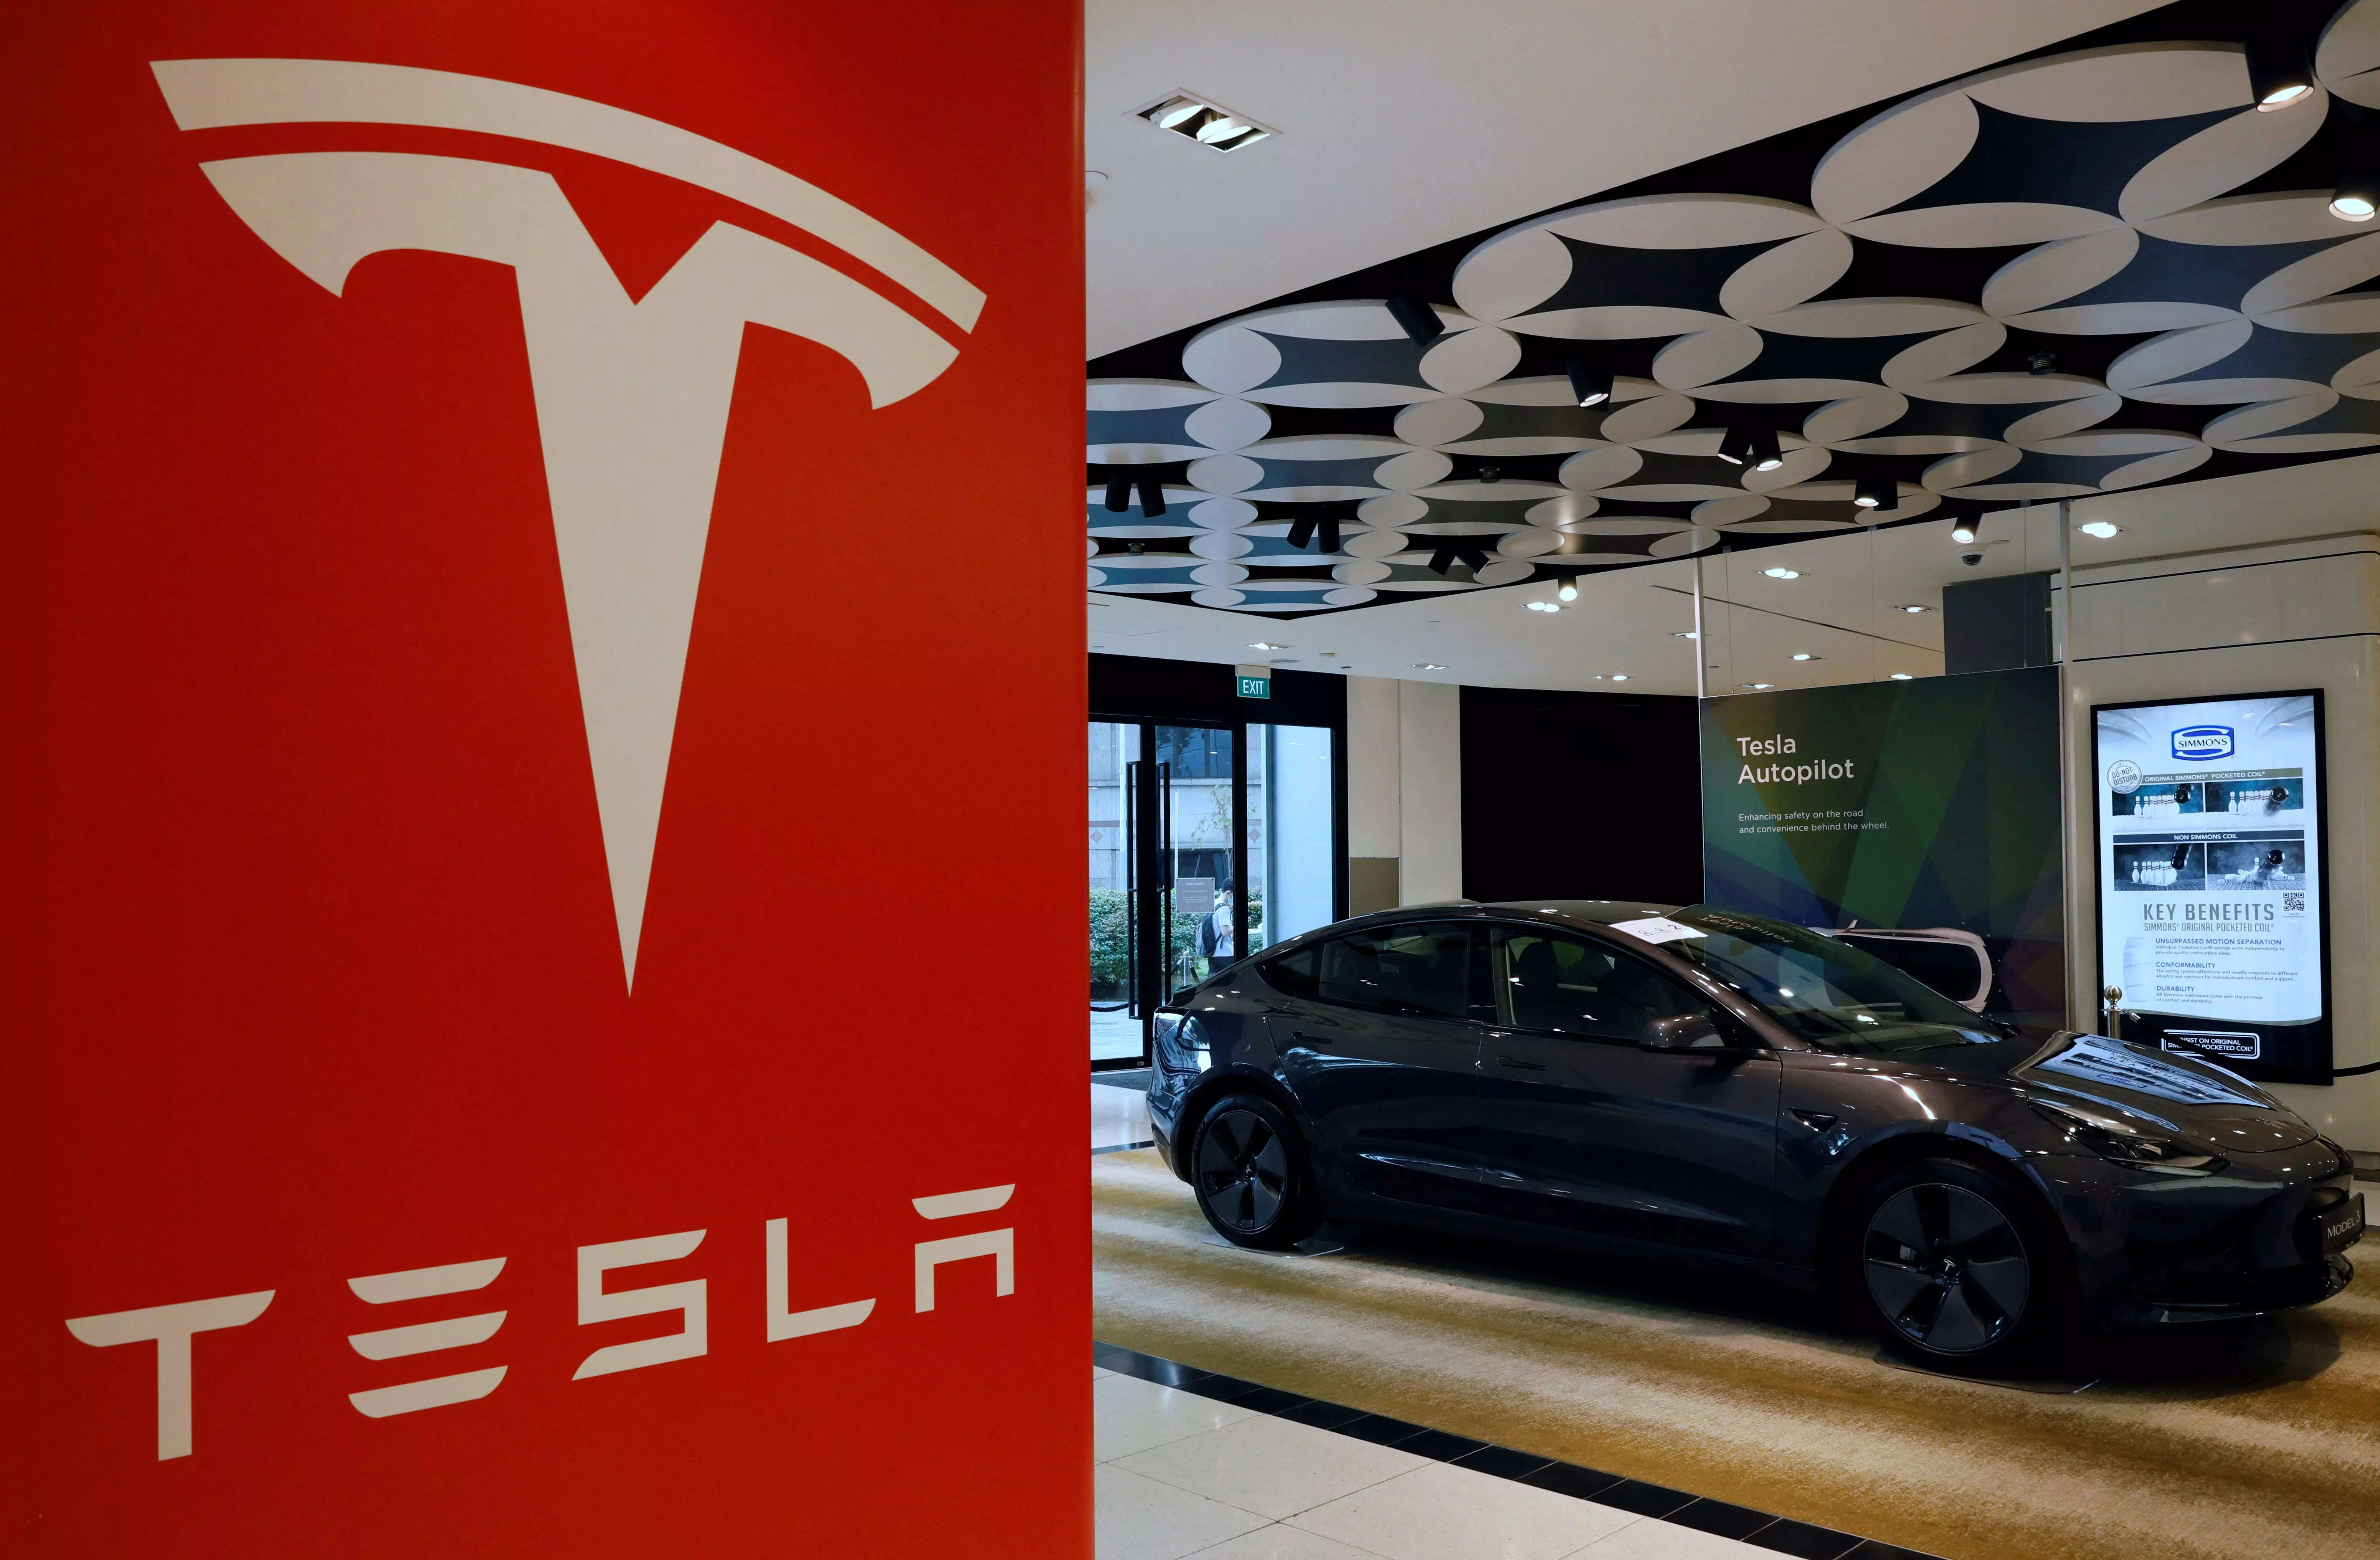 <p>Tesla vehicles often fail to achieve their advertised range estimates, causing customer dissatisfaction and raising range anxiety, which is the fear of running out of power before reaching a charger.</p>